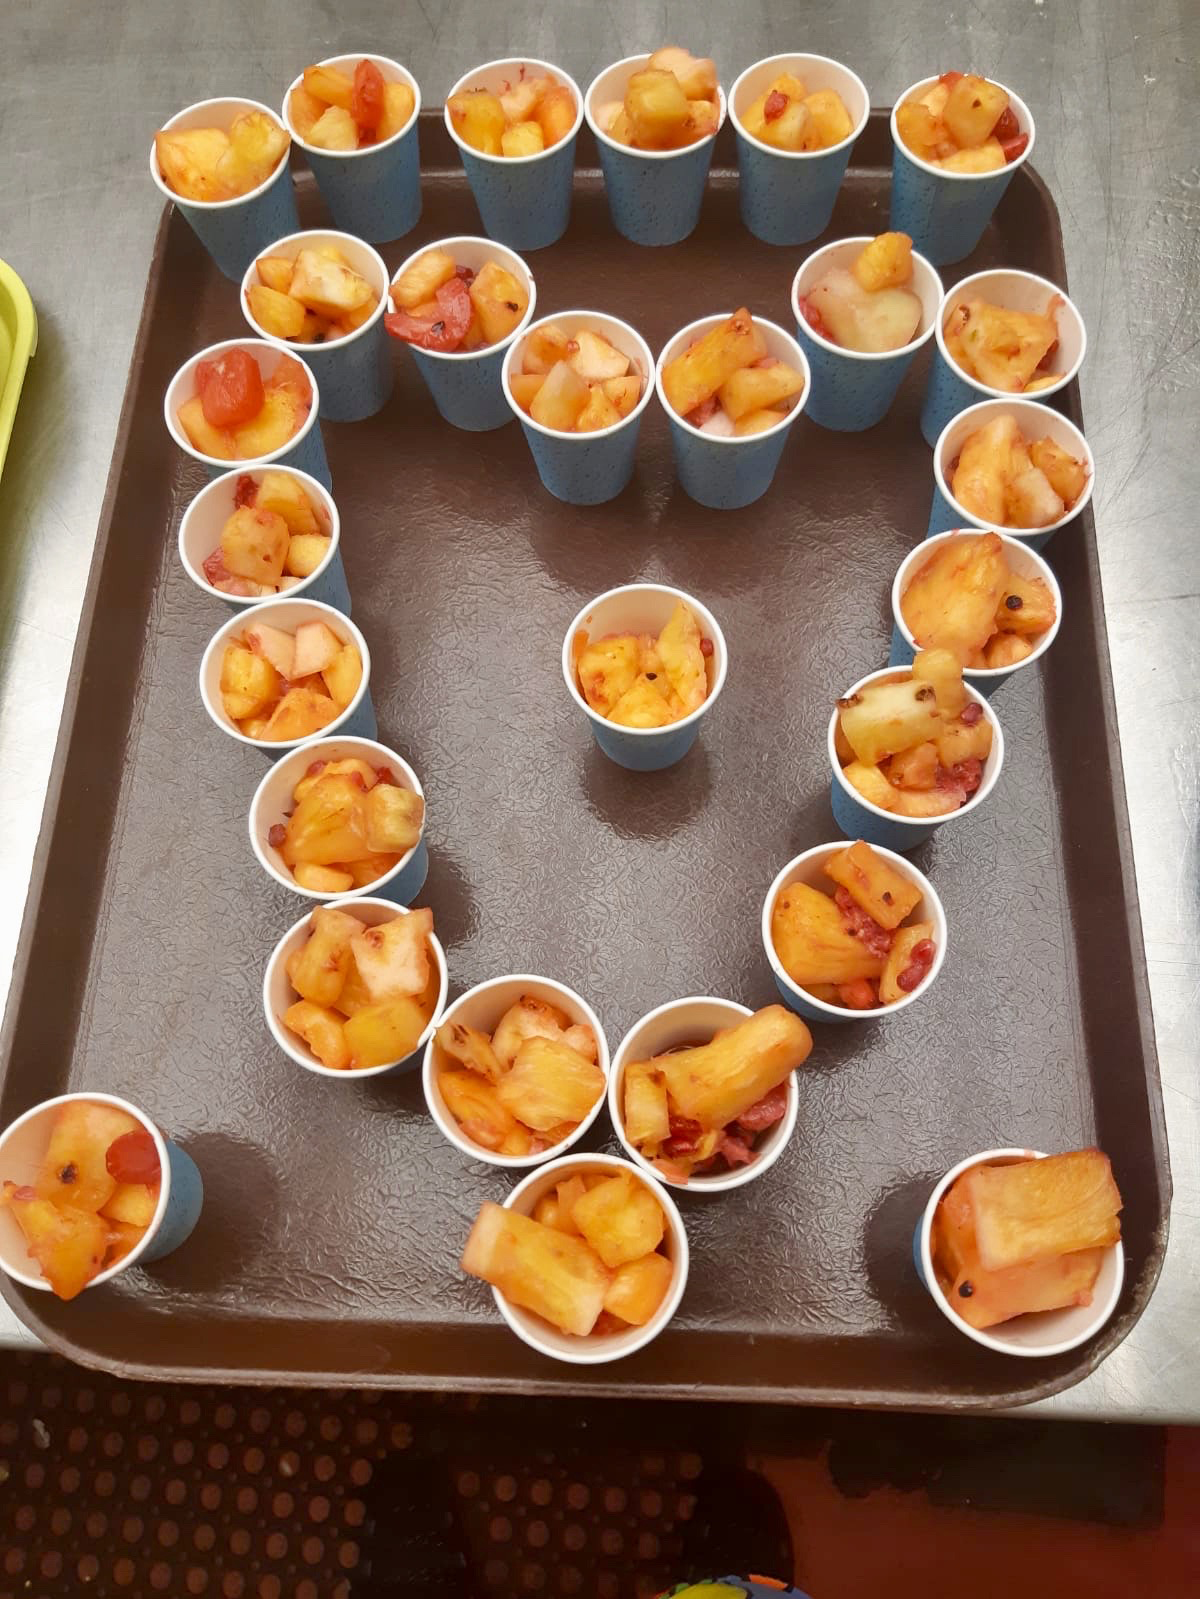 Bowls of fruit salad arranged in a heart